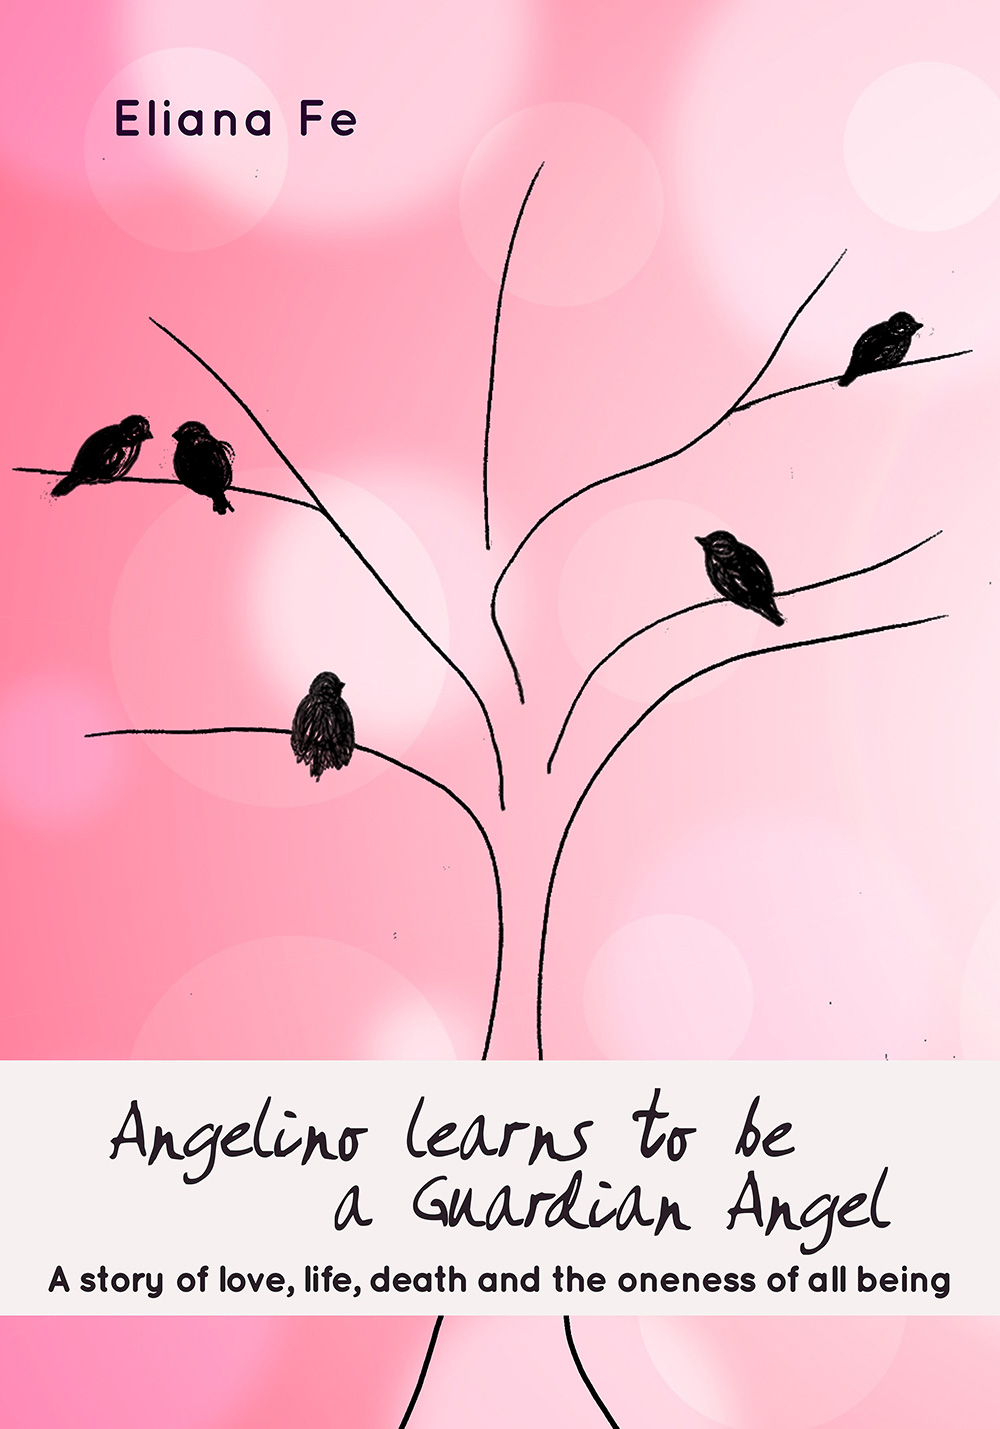 Cover of the e-book 'Angelino learns to be a Guardian Angel' by Eliana Fe